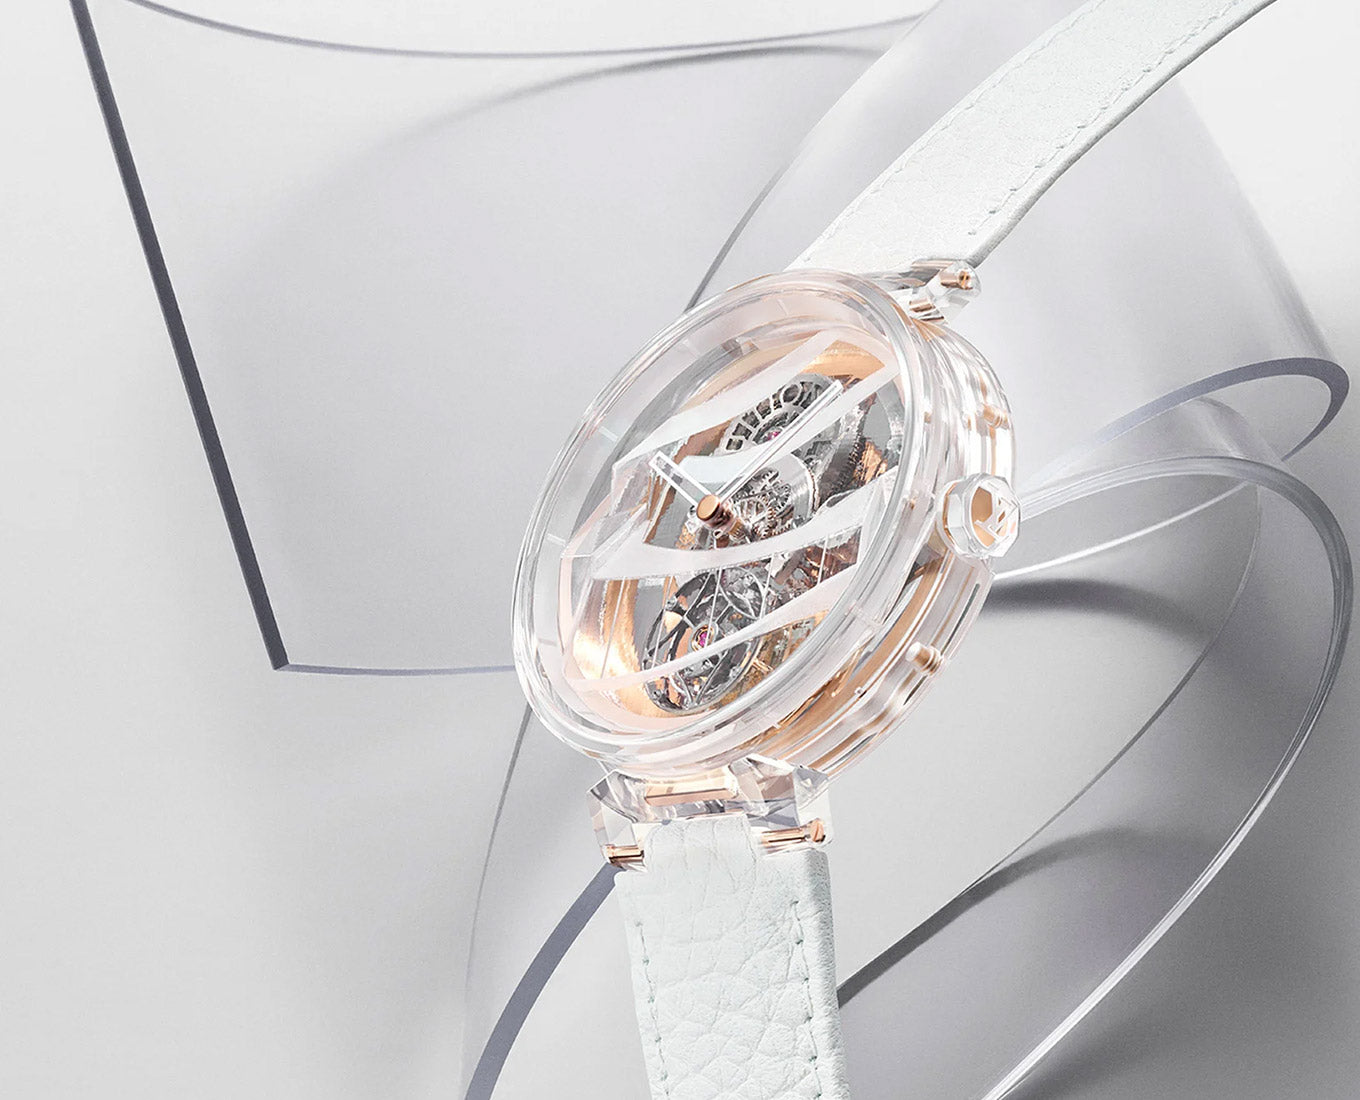 Architecture Frank Gehry Louis Vuitton Watch